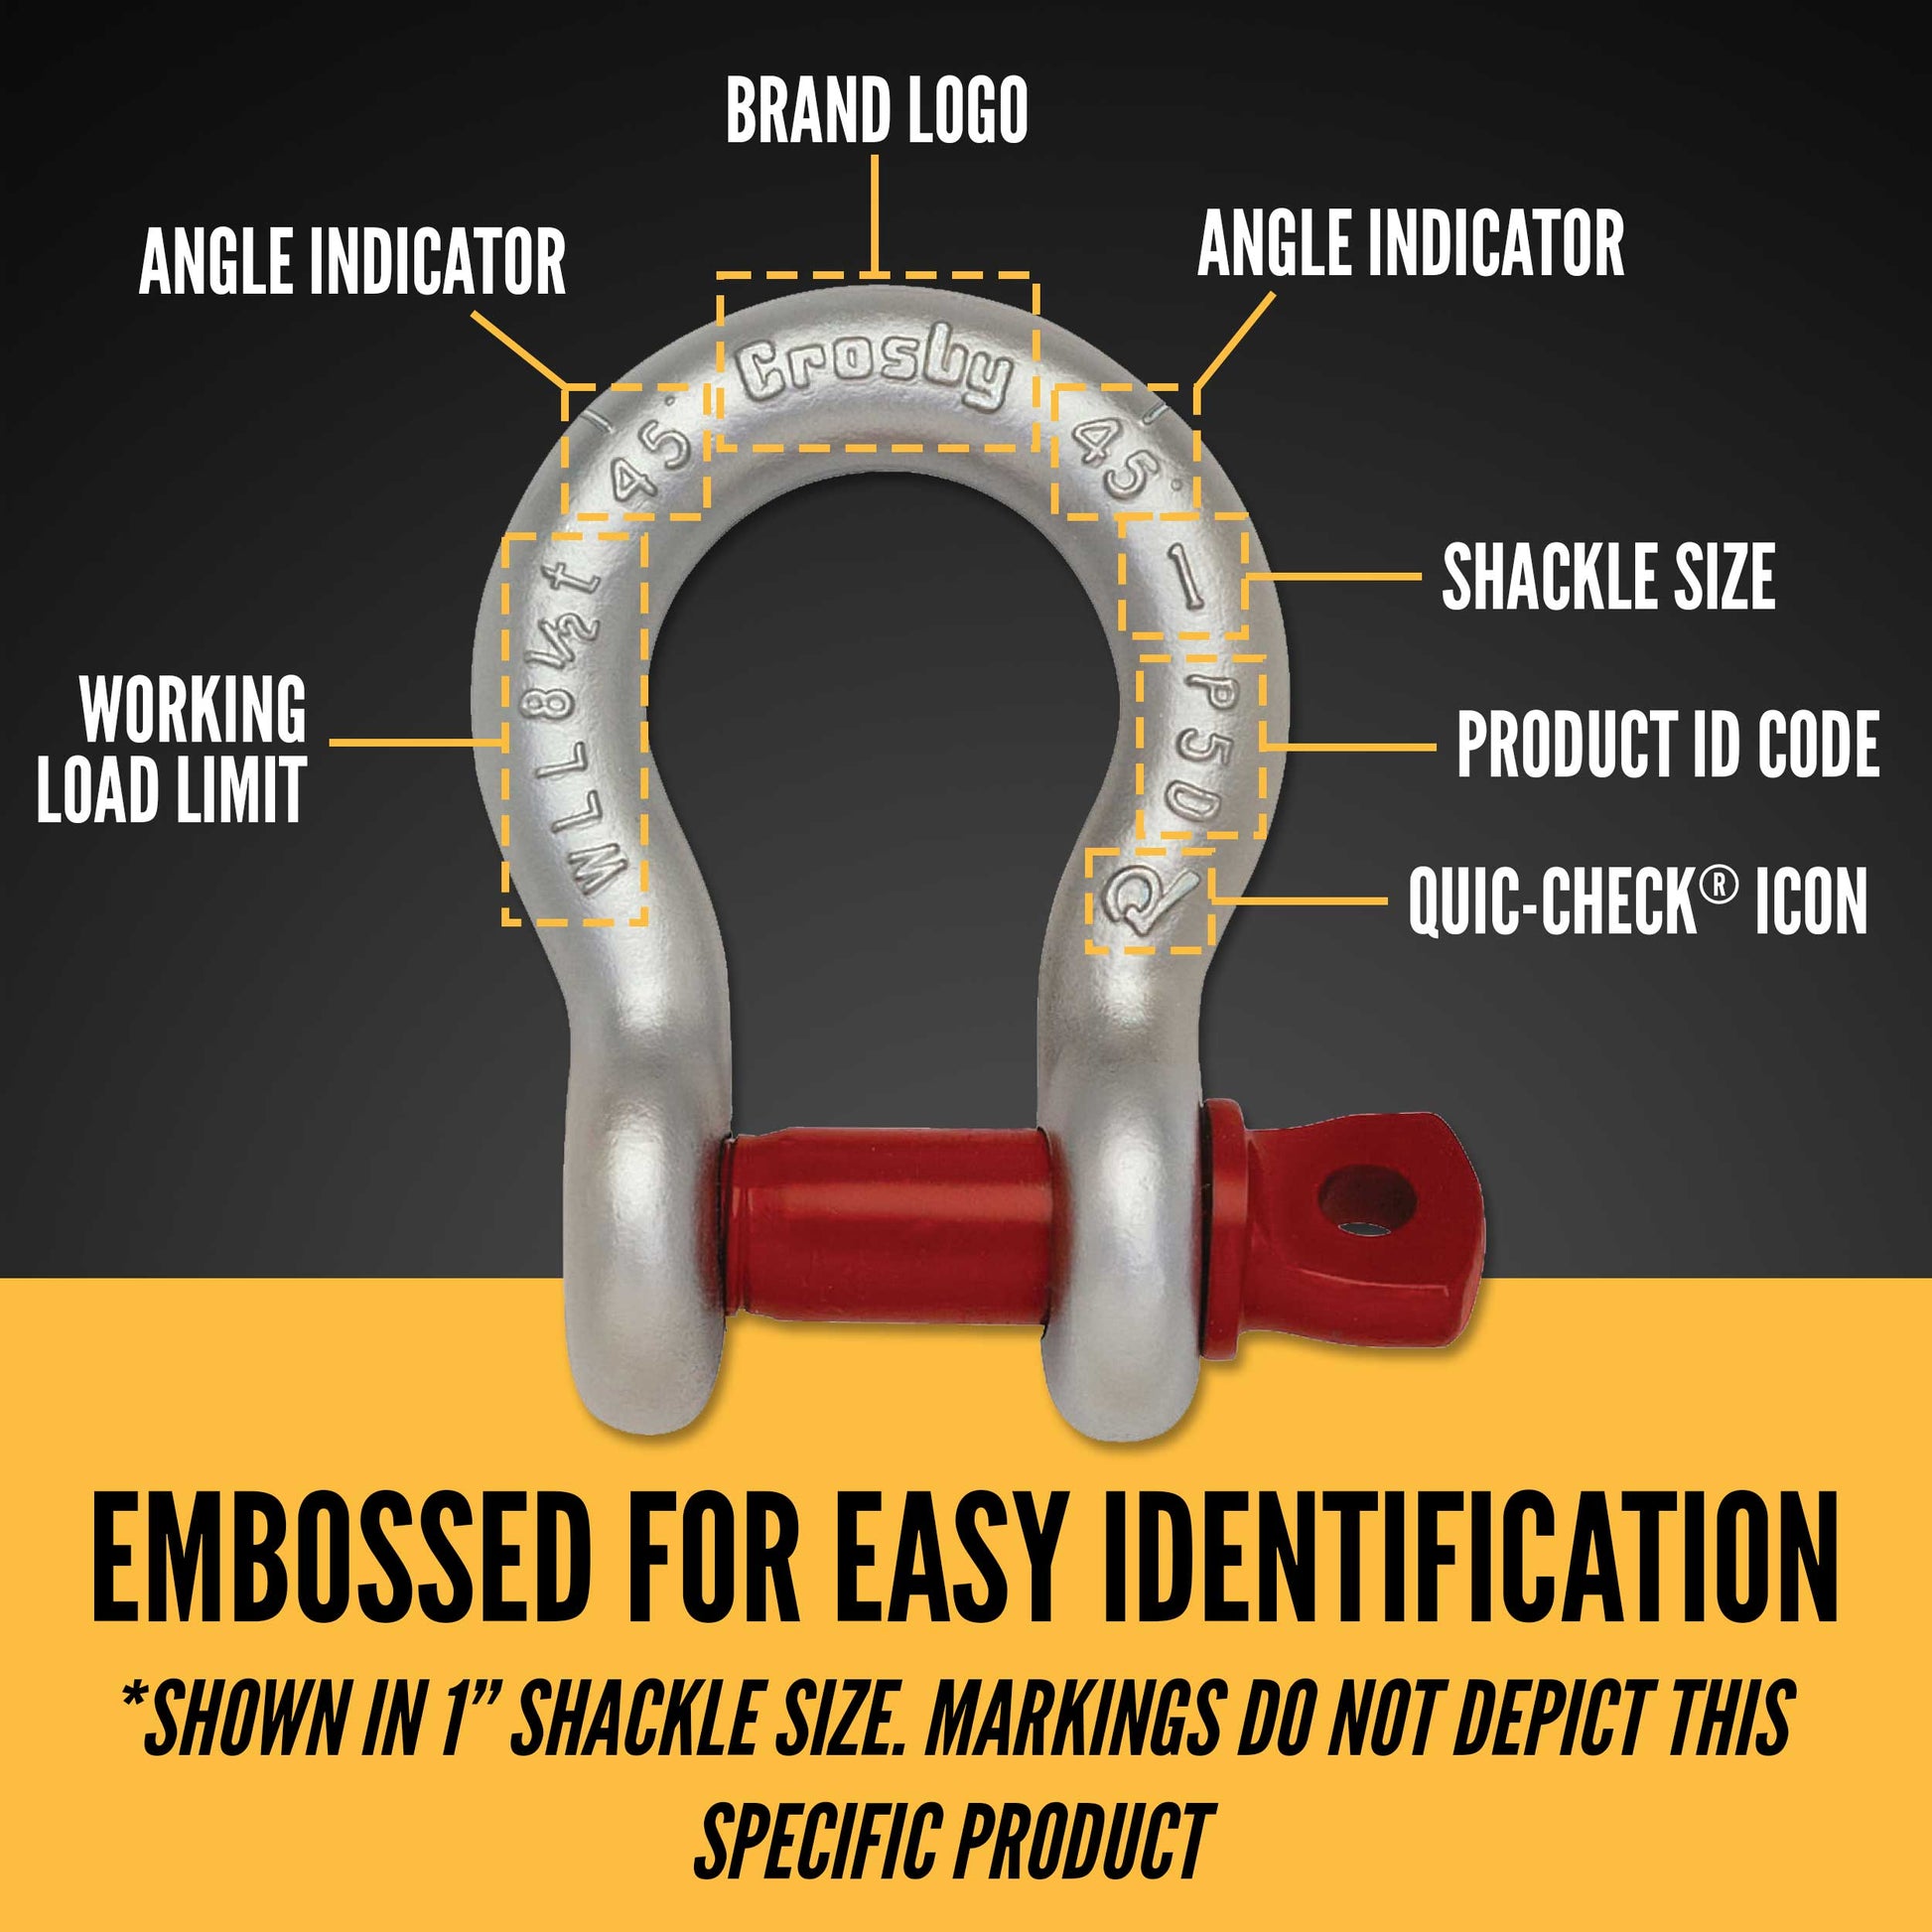 3/4" Crosby® Screw Pin Anchor Shackle | G-209 - 4.75 Ton embossed for easy identification